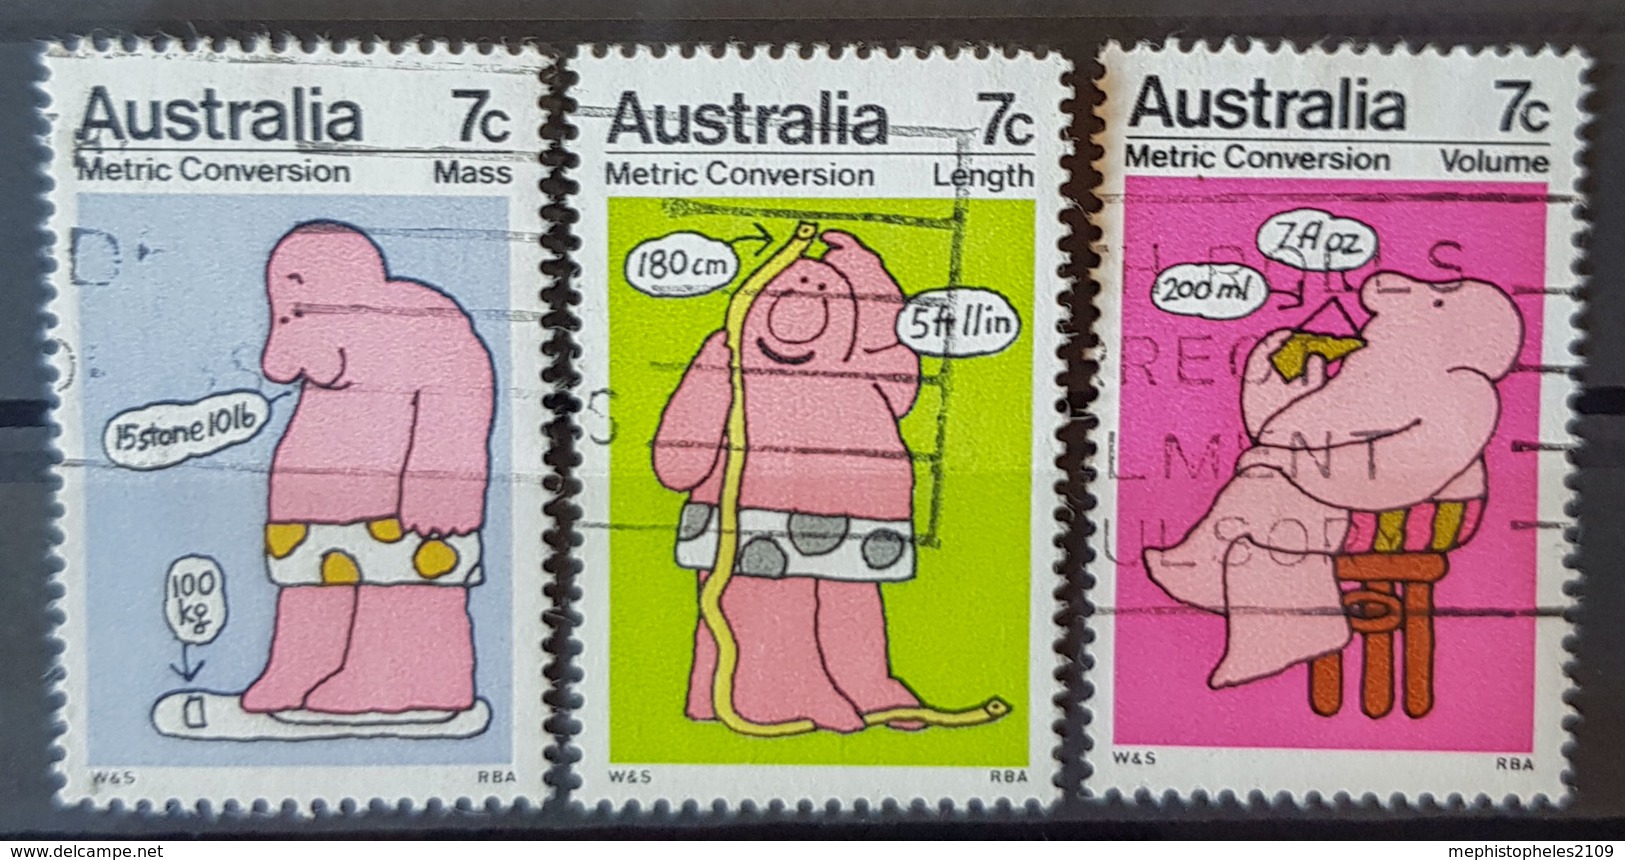 AUSTRALIA 1973 - Canceled - METRIC CONVERSION - 7c - Used Stamps